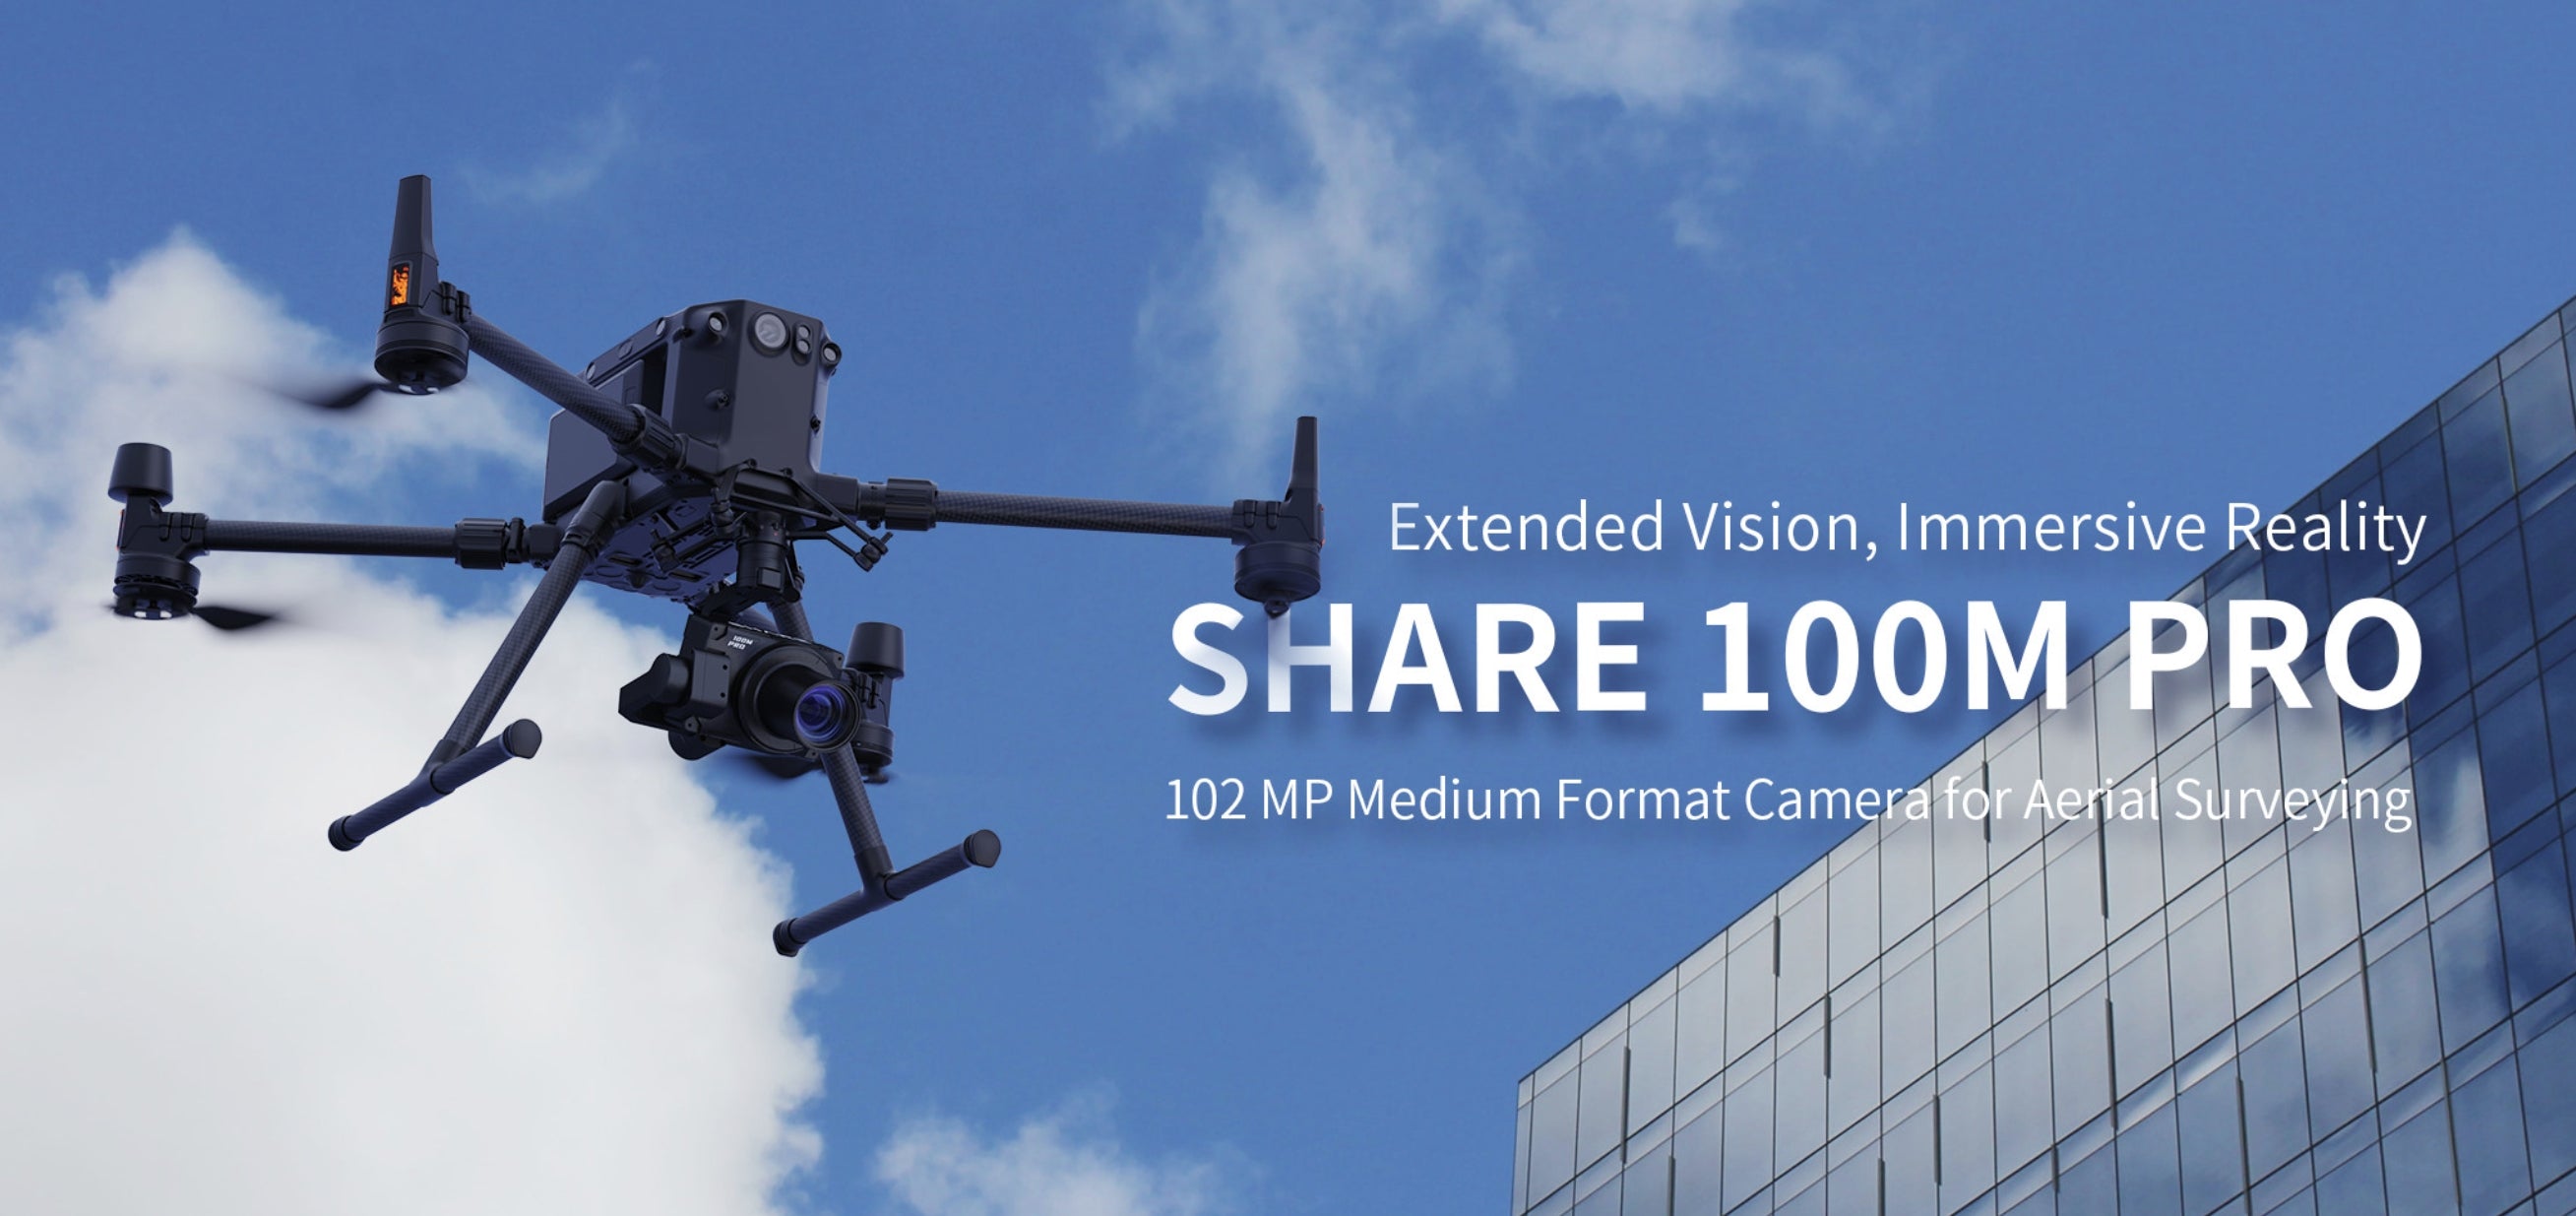 SHARE 100M Pro V2, High-resolution aerial camera for drone-based mapping and surveying with 102MP medium-format sensor.